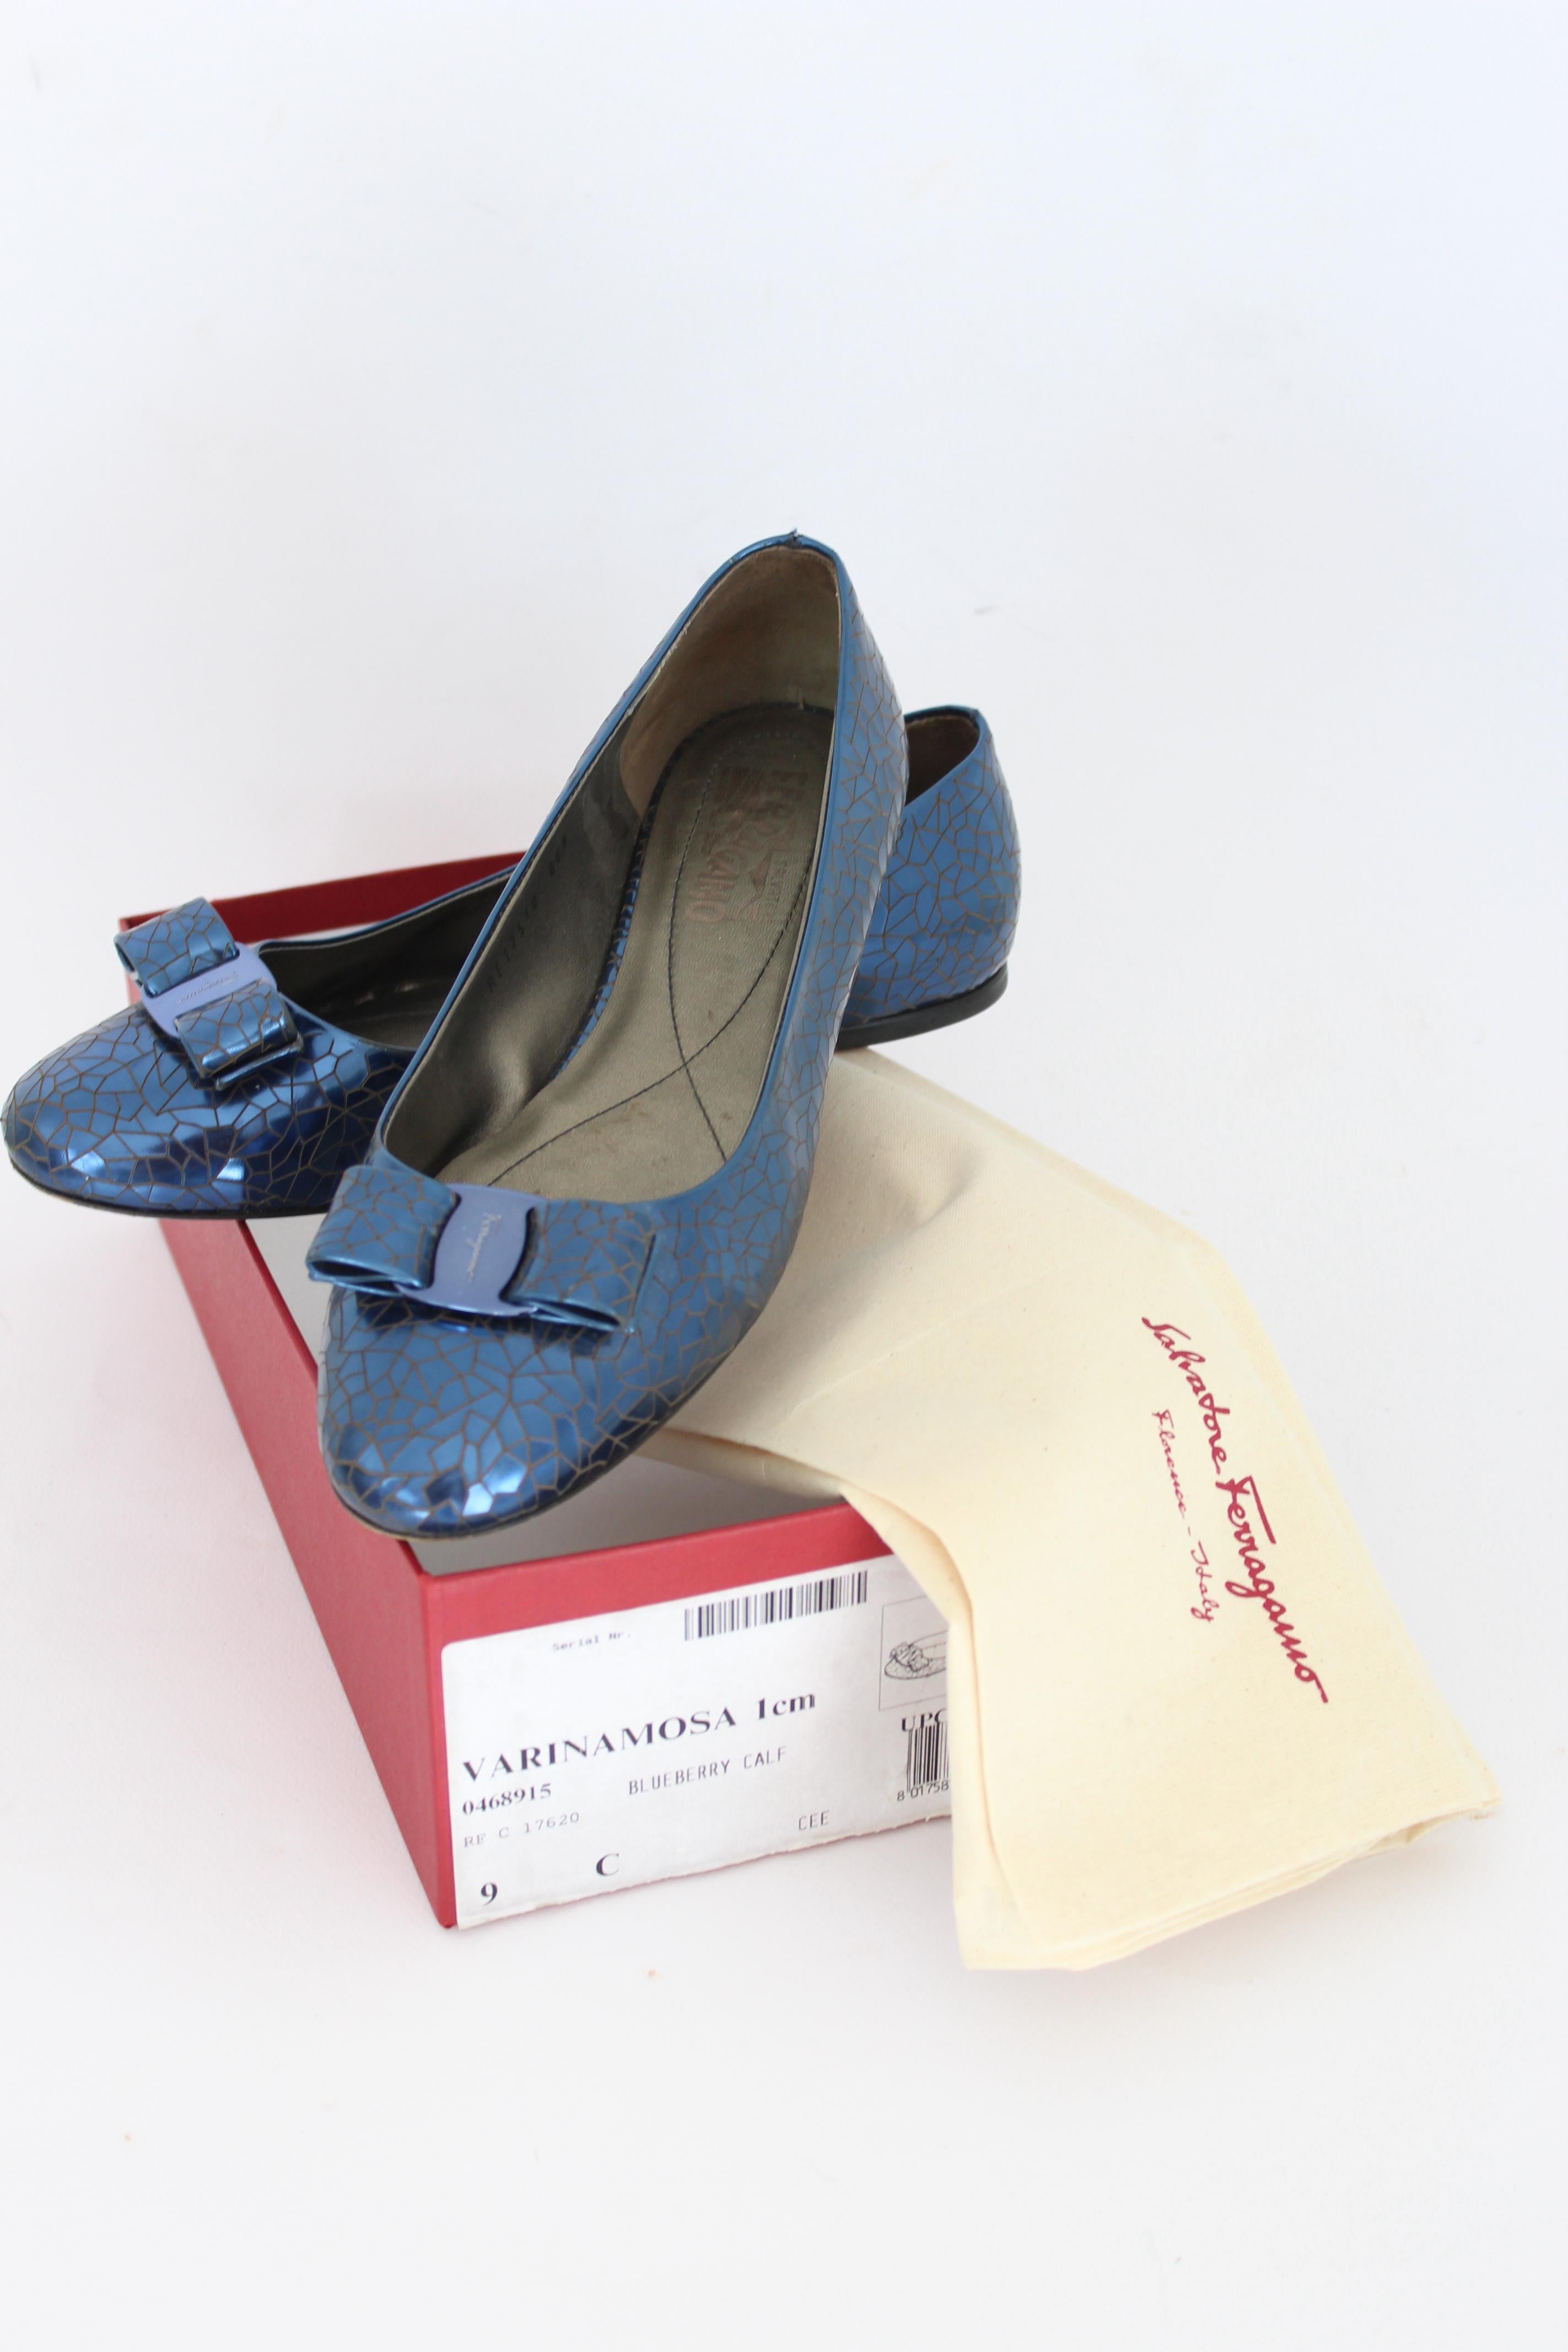 Salvatore Ferragamo 2000s women's shoes Varinamosa. Metallic blue ballerina flats. Rounded toe with bow. Made in Italy.

Internal Code: Rf 17510 005

Condition: Very Good

Item in excellent condition. The sole is worn as it is visible in the